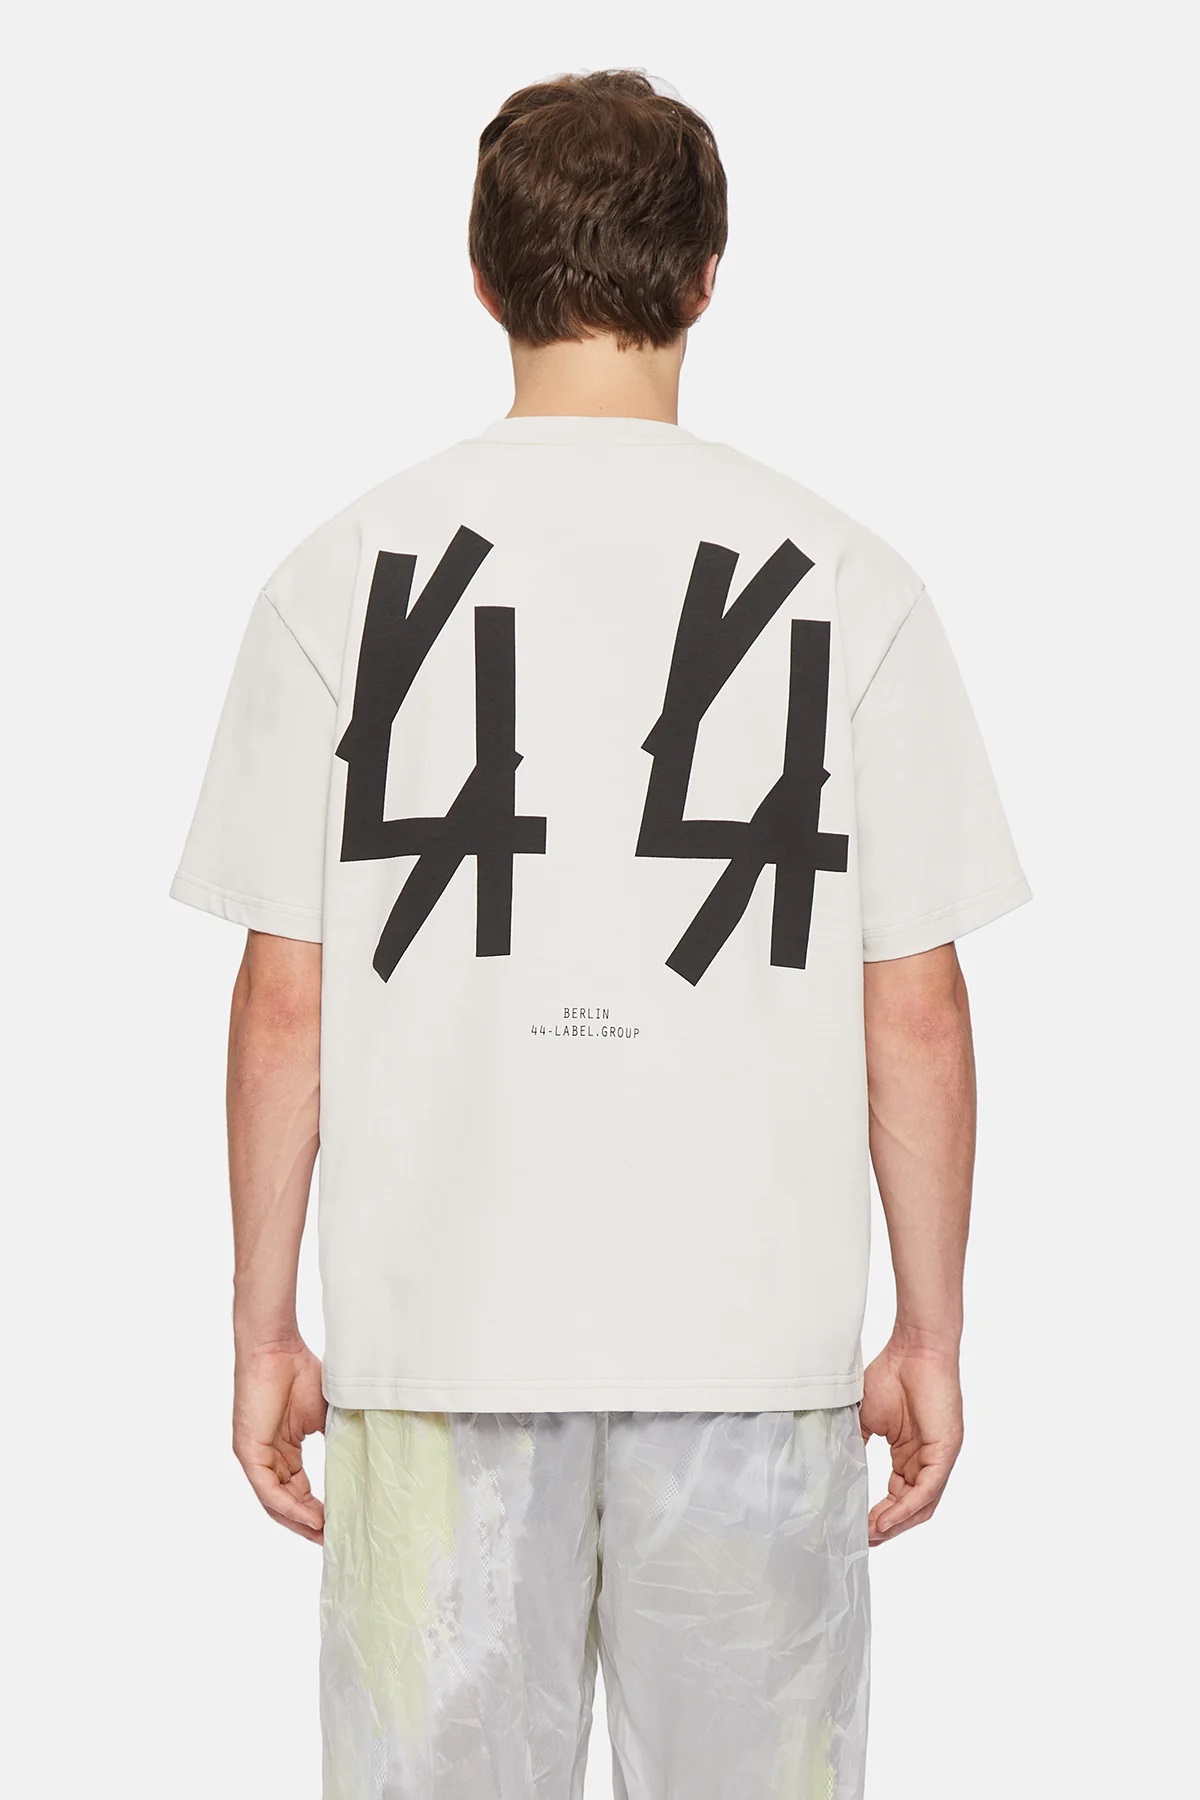 44 LABEL GROUP Classic T in Dirty White/Black